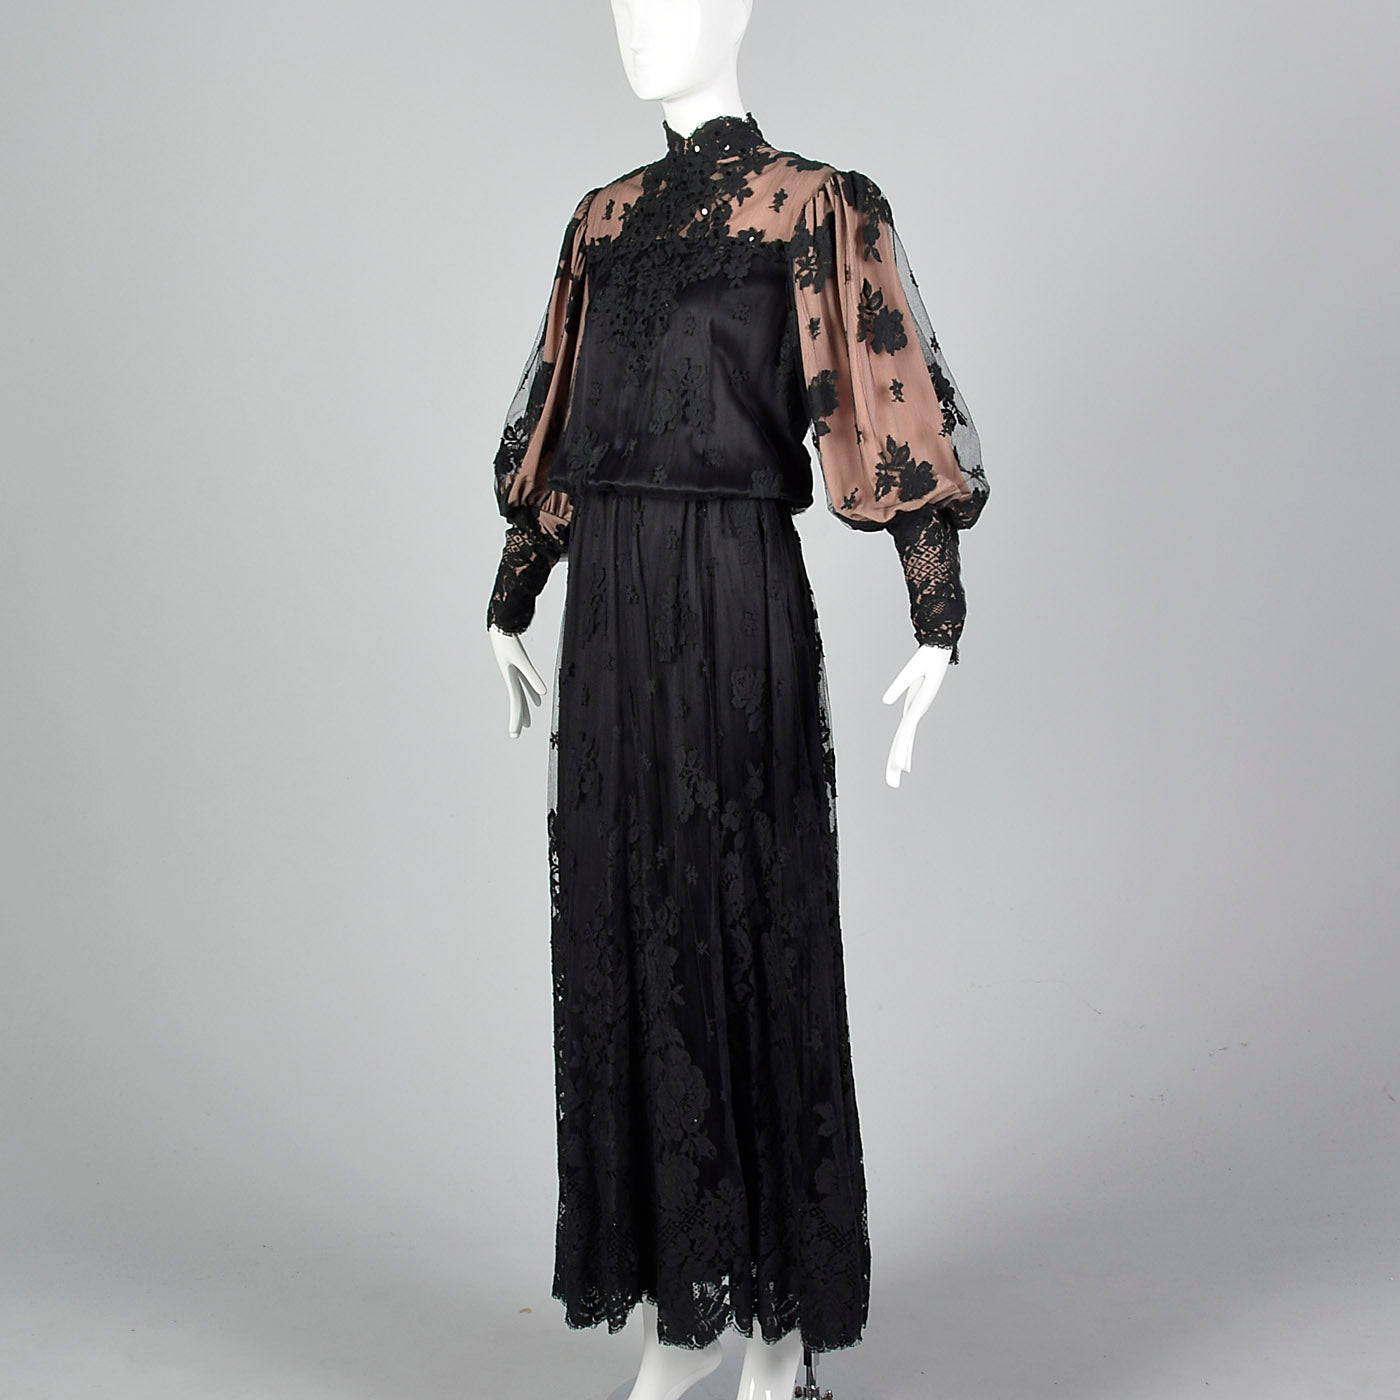 1970s Black Lace Overlay Dress with Sequin Bust